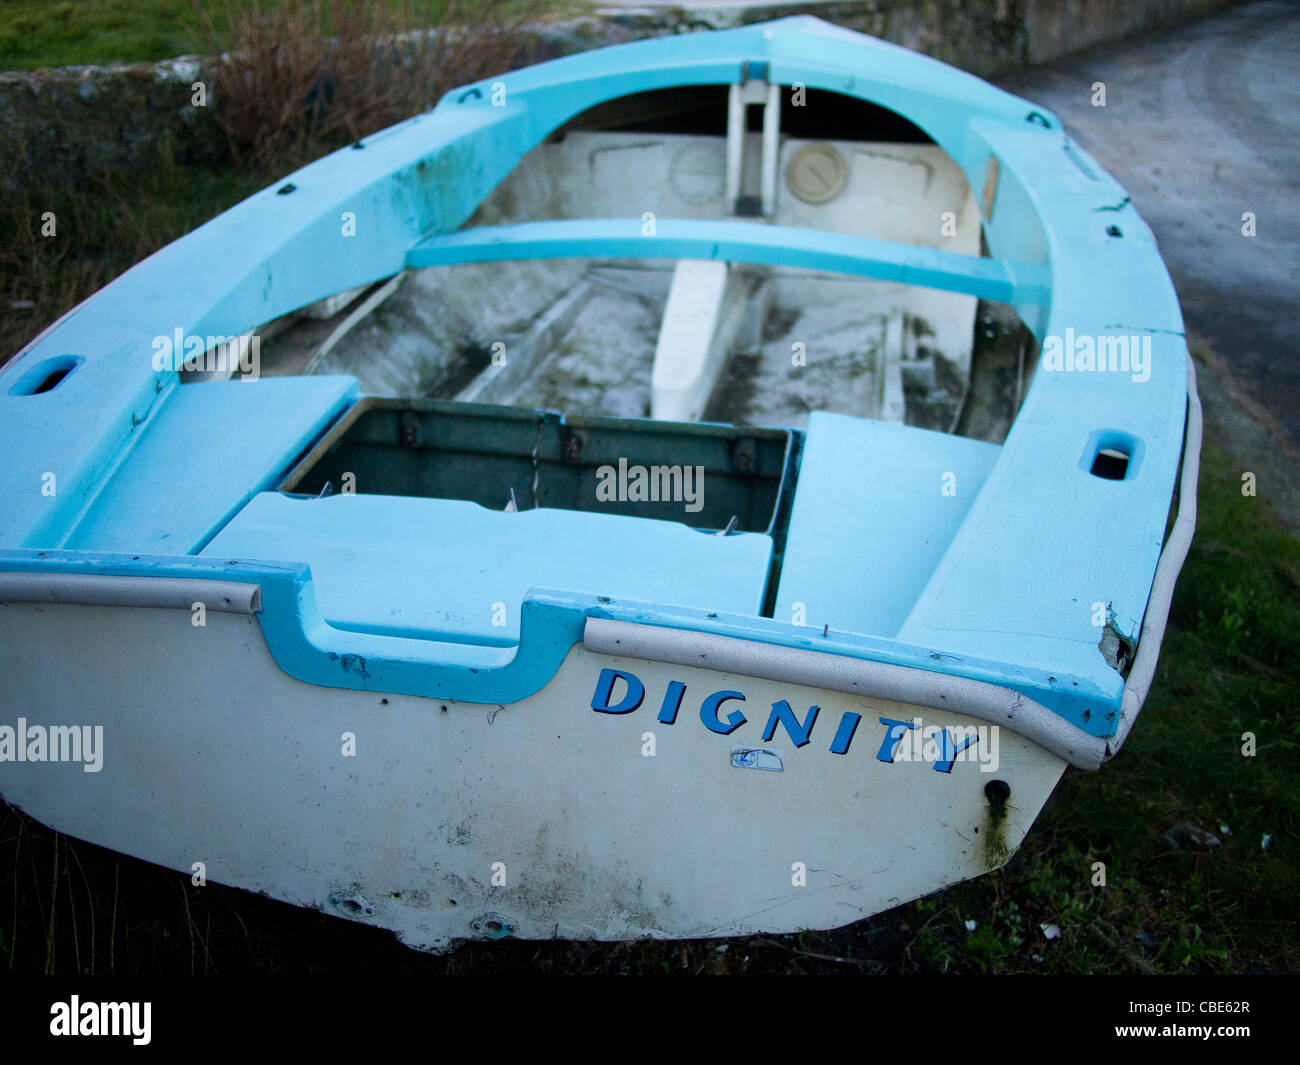 Ship Called Dignity, St Monans, Fife Stock Photo